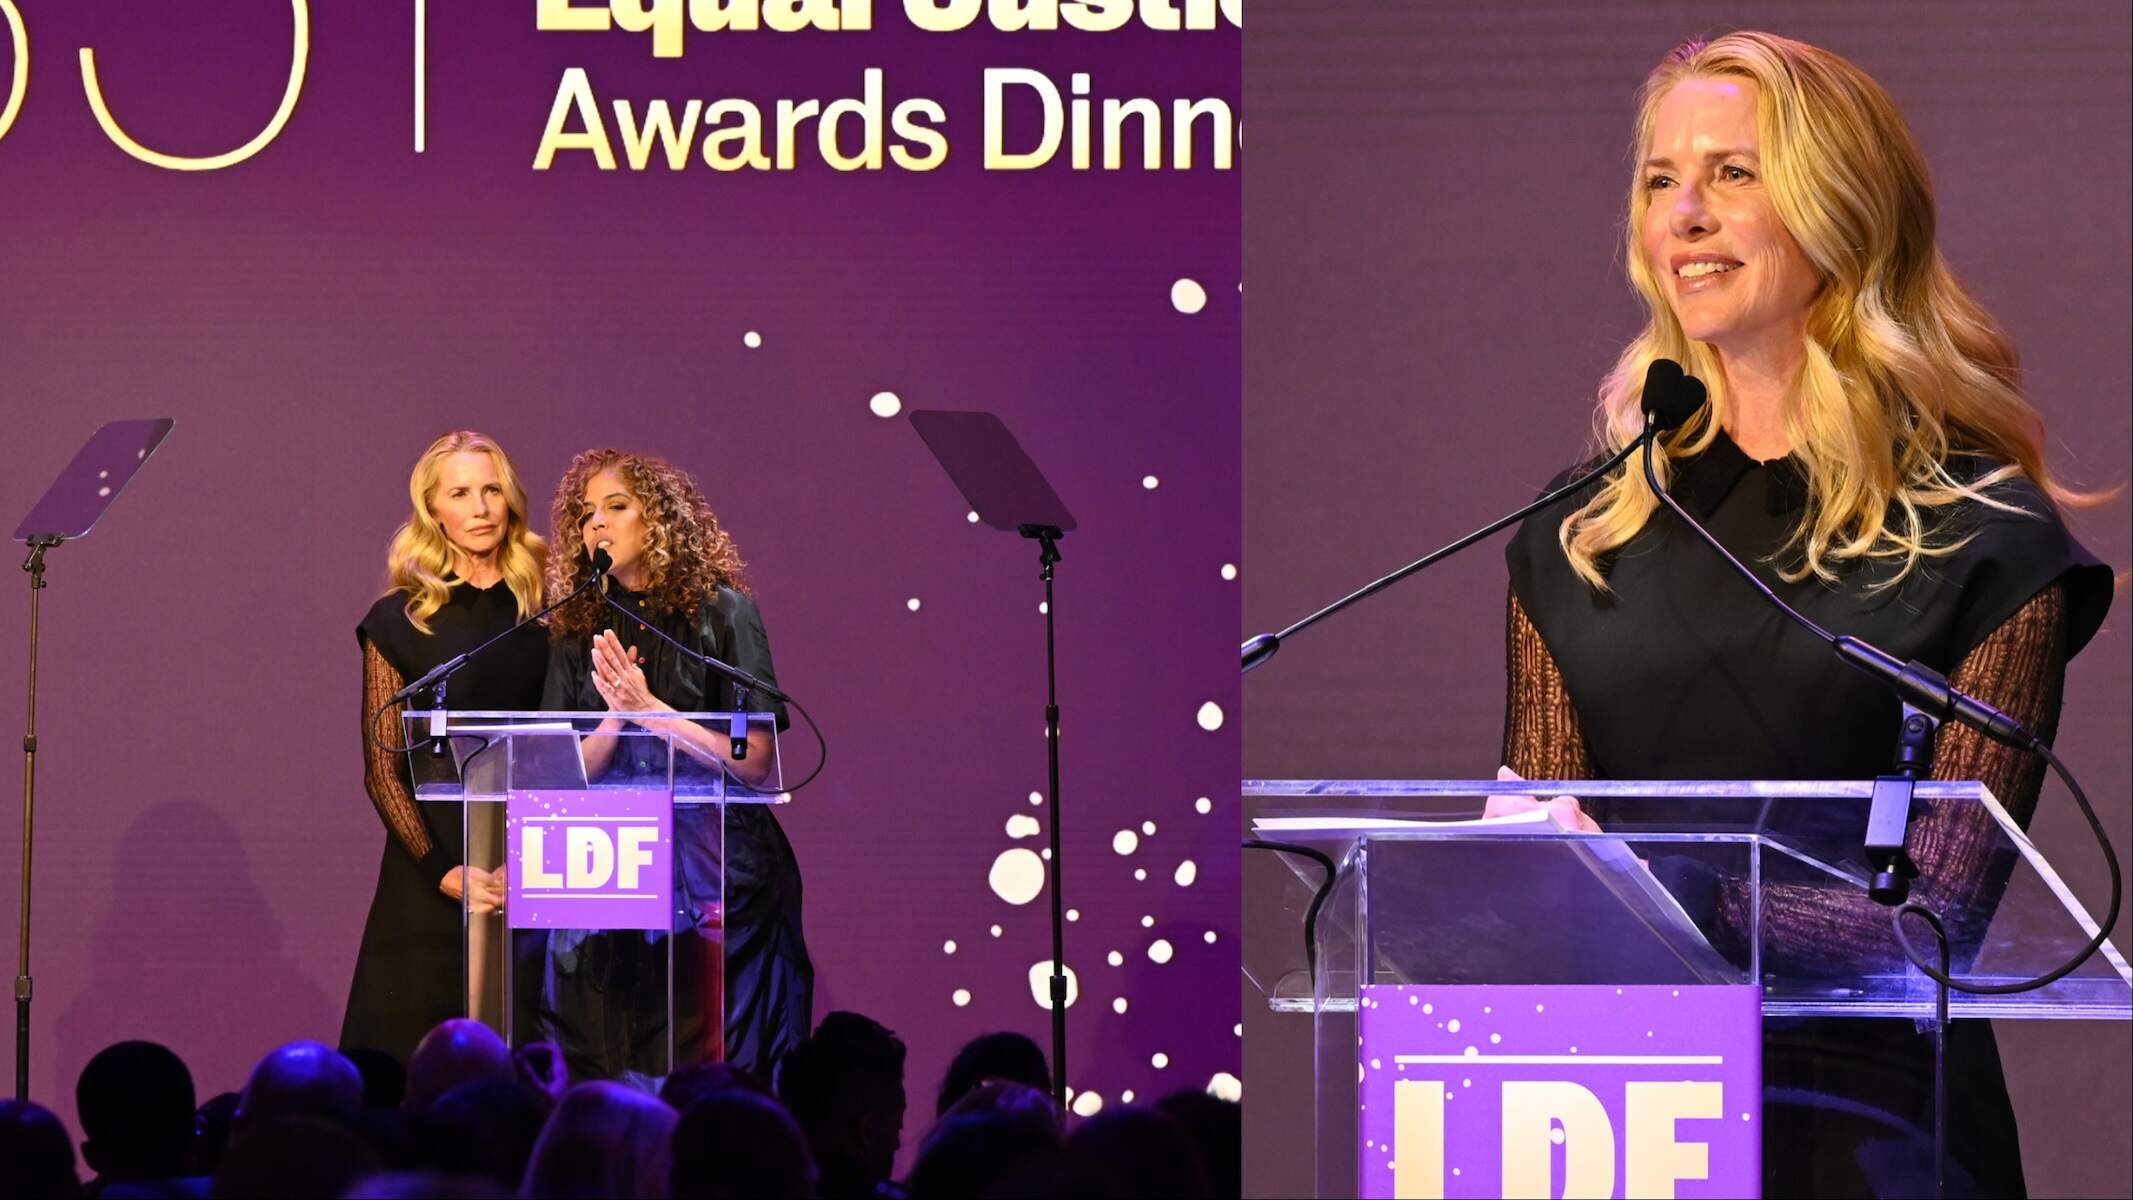 Laurene Powell Jobs and Russlynn Ali speak onstage at Legal Defense Fund's National Equal Justice Awards Dinner